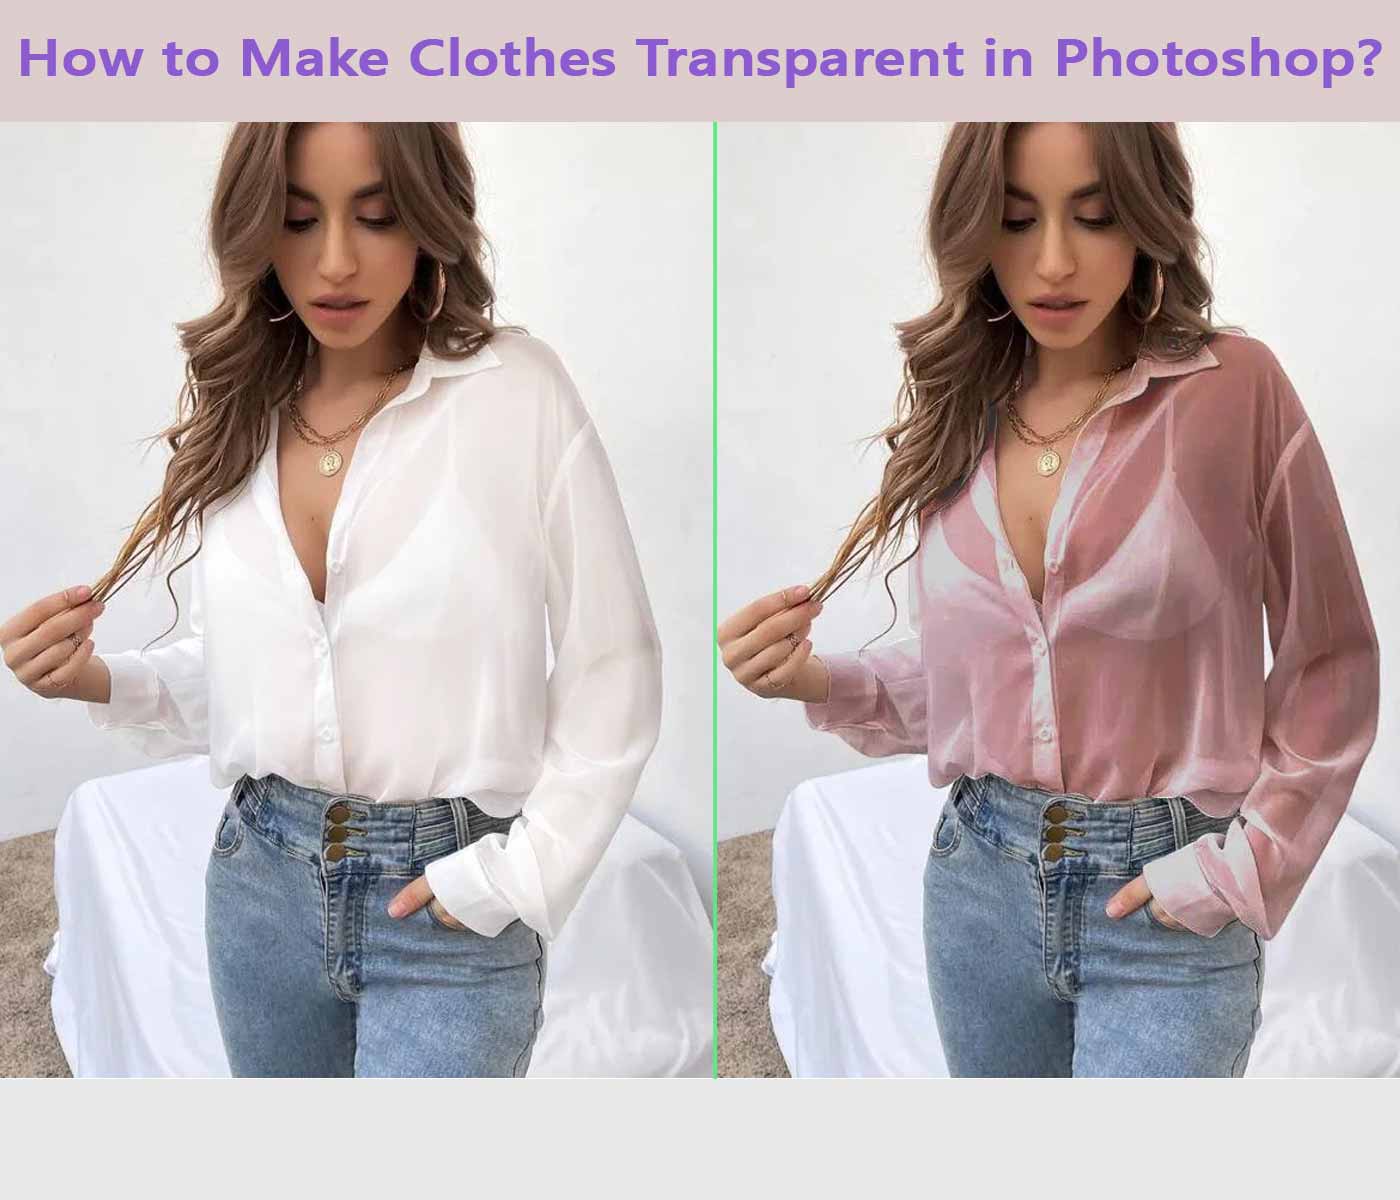 How to Make Clothes Transparent in Photoshop